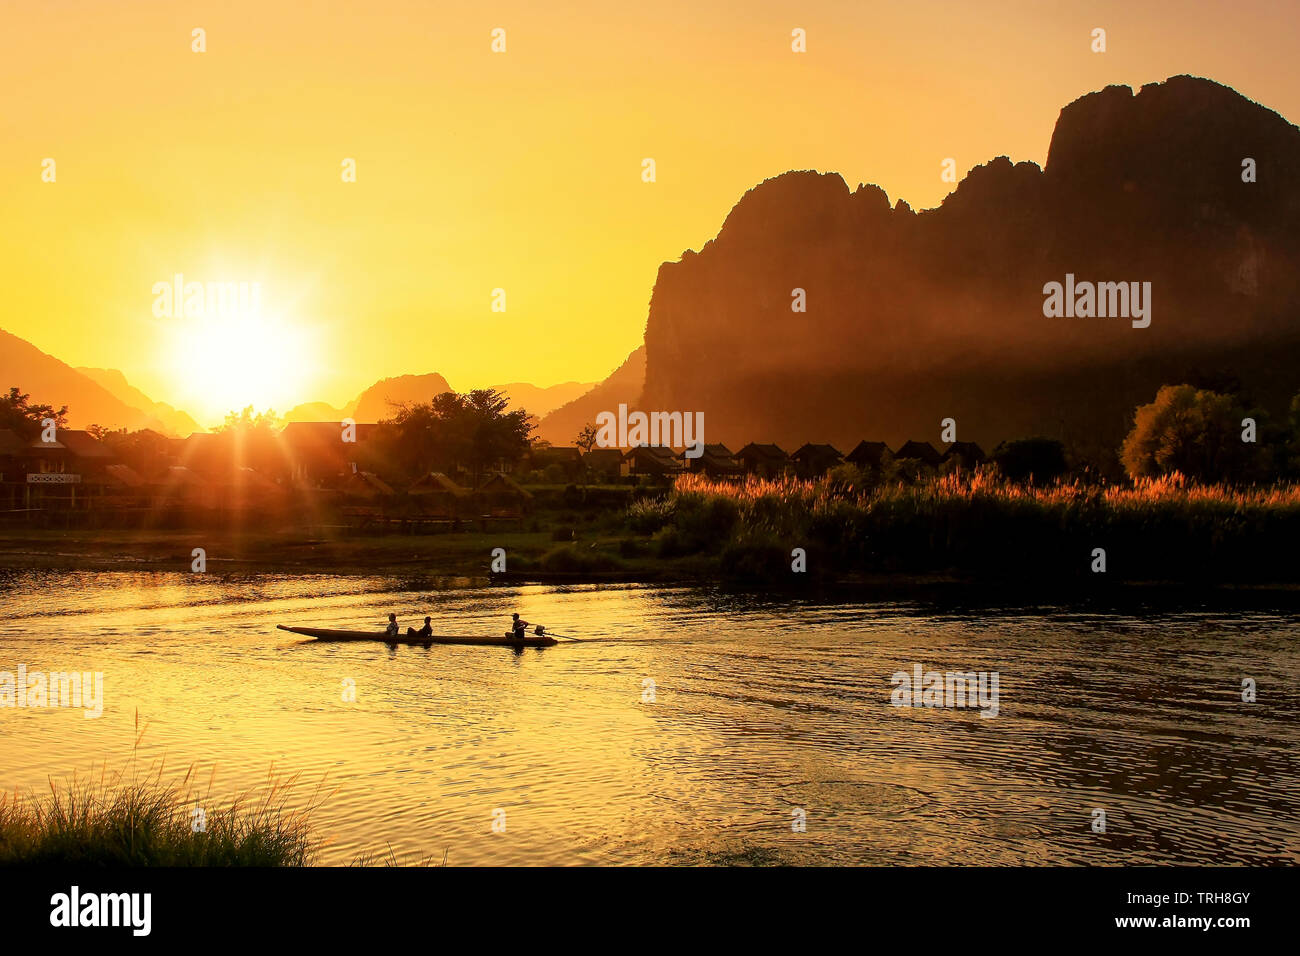 Sunset over Nam Song River with silhouetted rock formations and a boat in Vang Vieng, Laos. Vang Vieng is a popular destination for adventure tourism Stock Photo